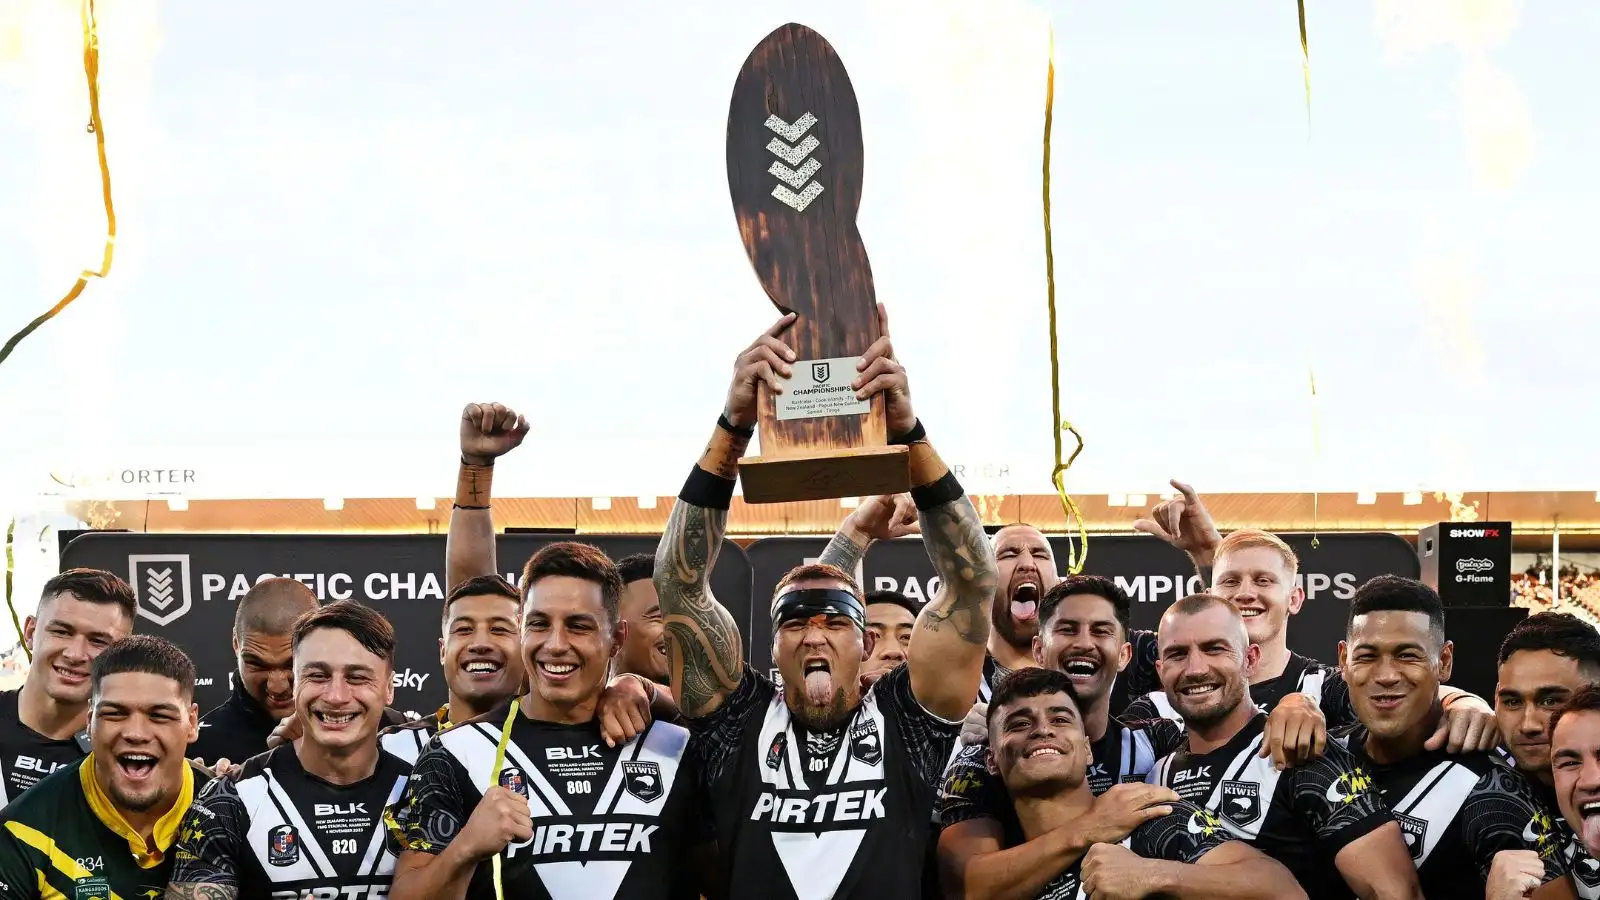 New Zealand stun Australia as Kiwis inflict biggest-ever test defeat on Kangaroos to be crowned Pacific Cup champions